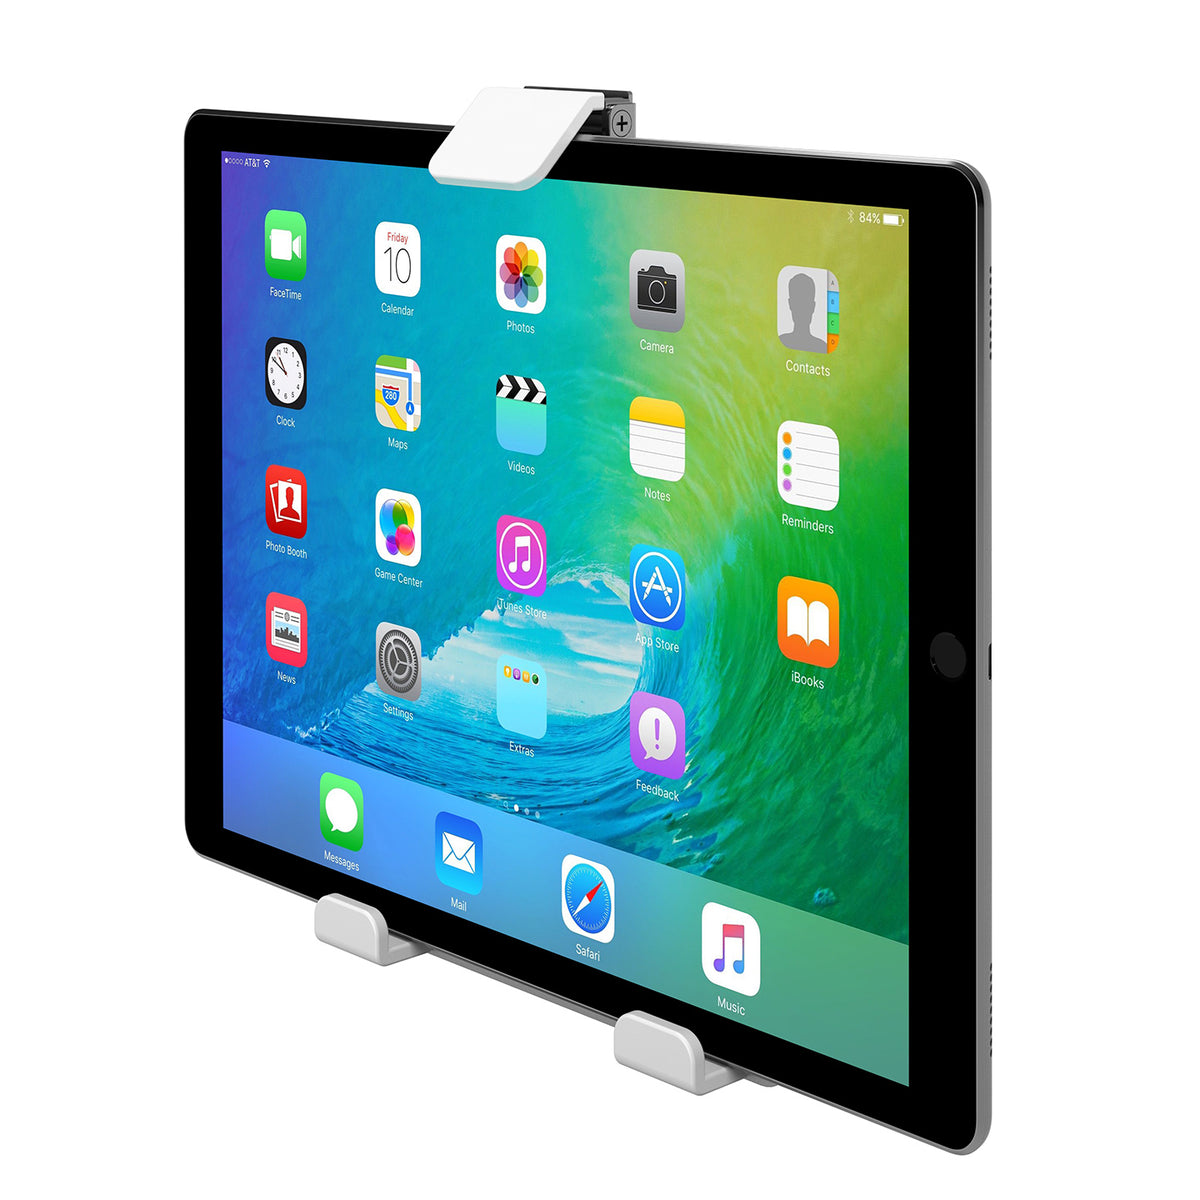 Viewmate universal tablet holder - option 962